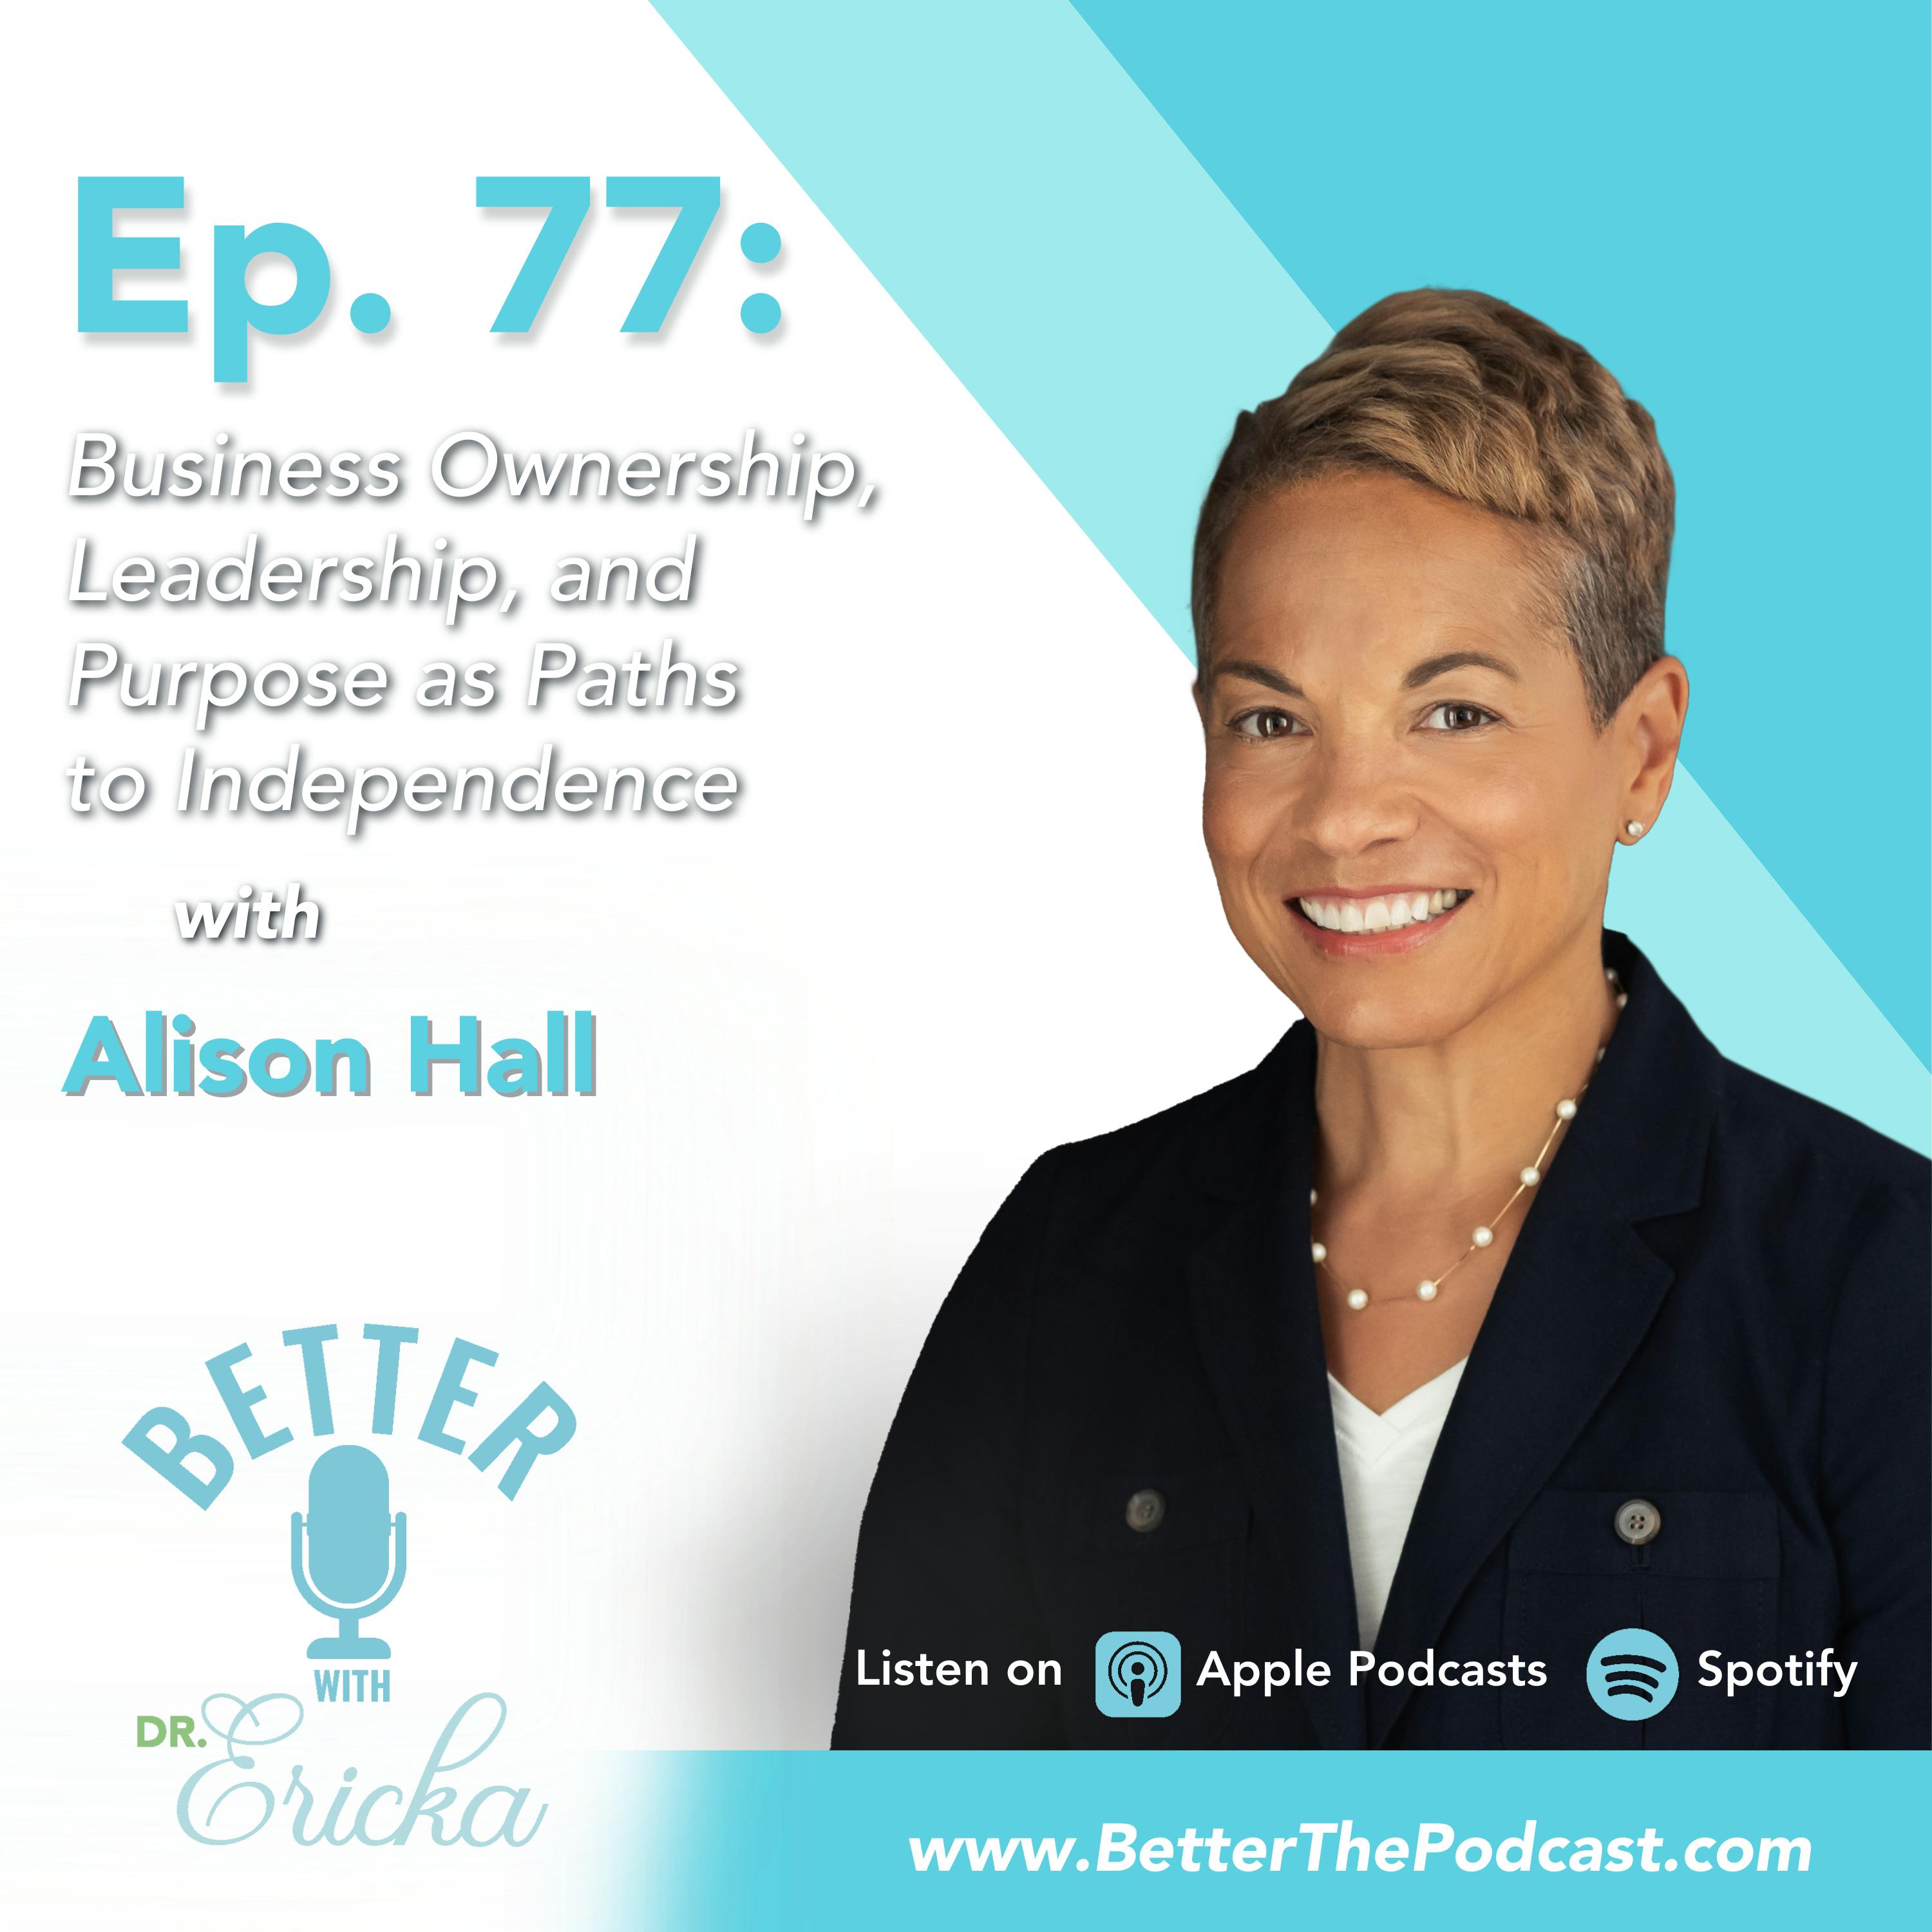 Business Ownership, Leadership, and Purpose as Paths to Independence with Alison Hall